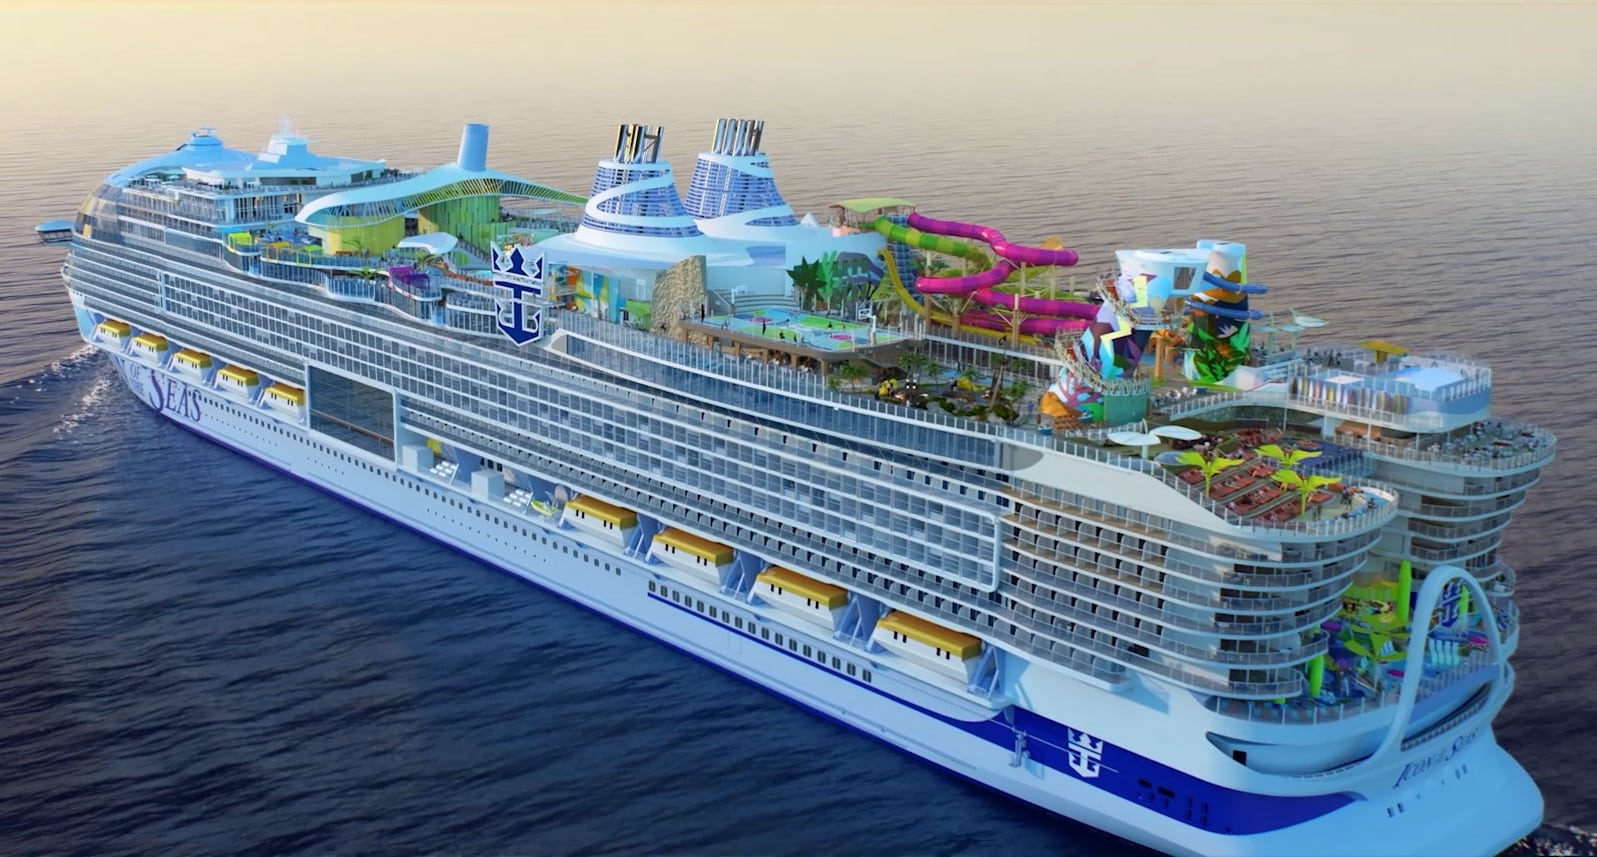 Royal Caribbean's Icon of the Seas, the largest cruise ship in history